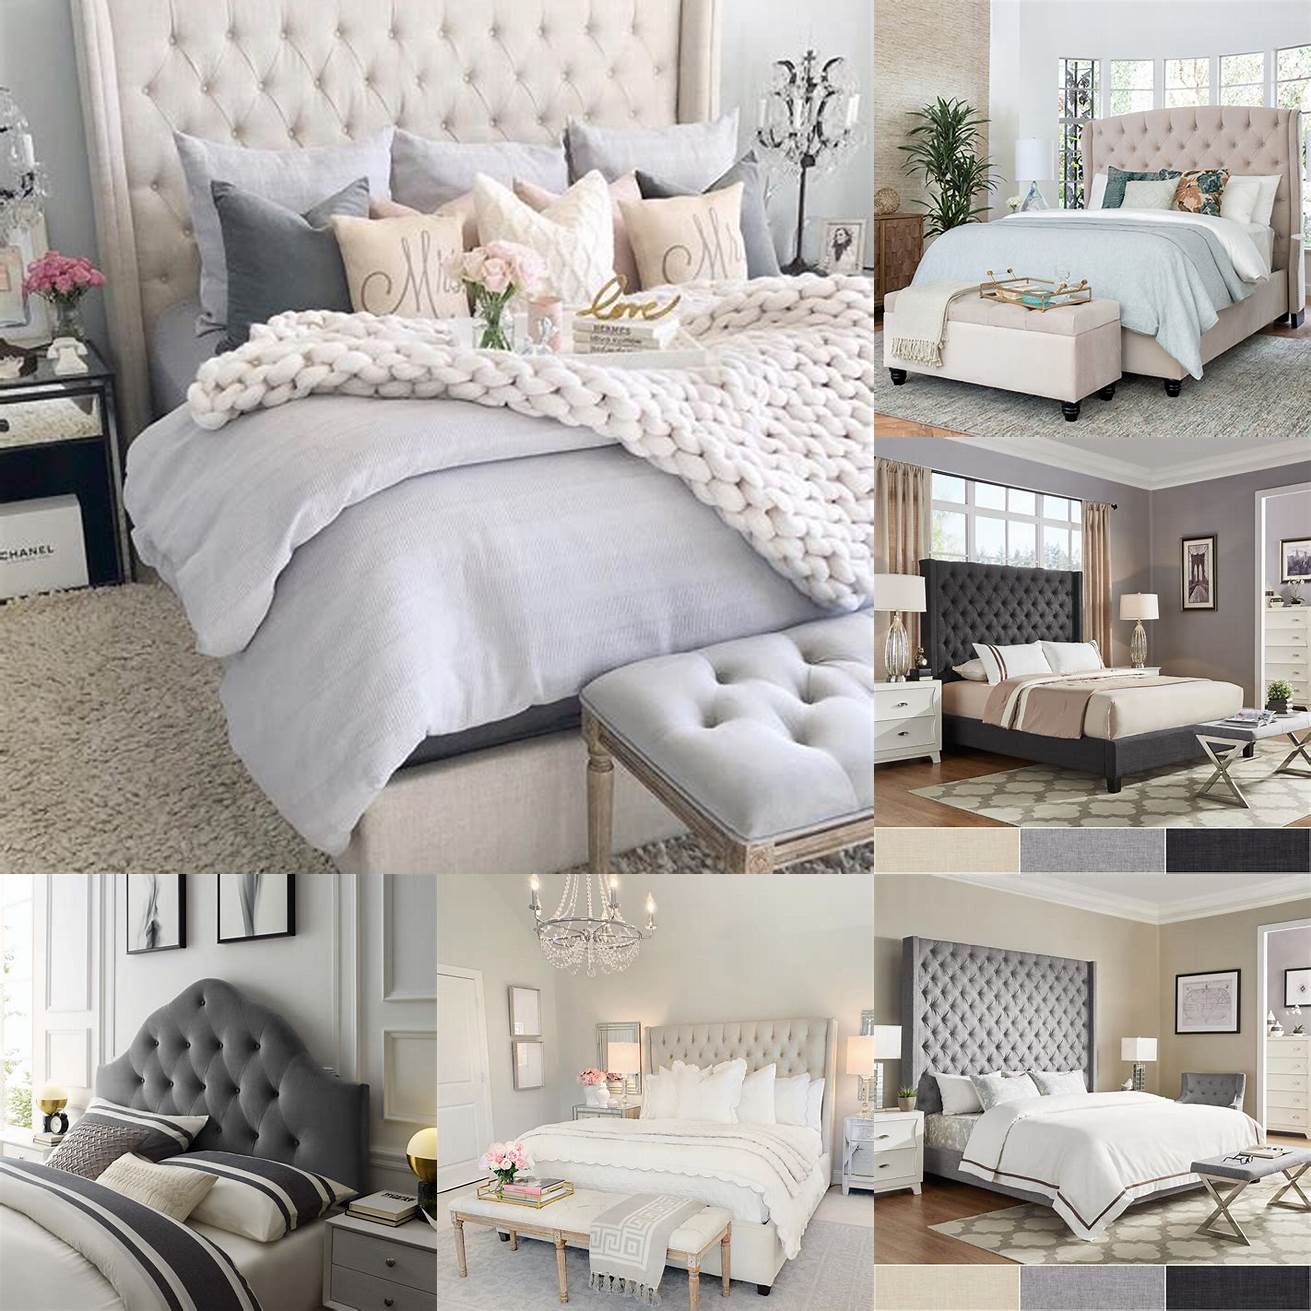 Choose the right style Pick a tufted bed that matches your personal style and complements the décor of your bedroom